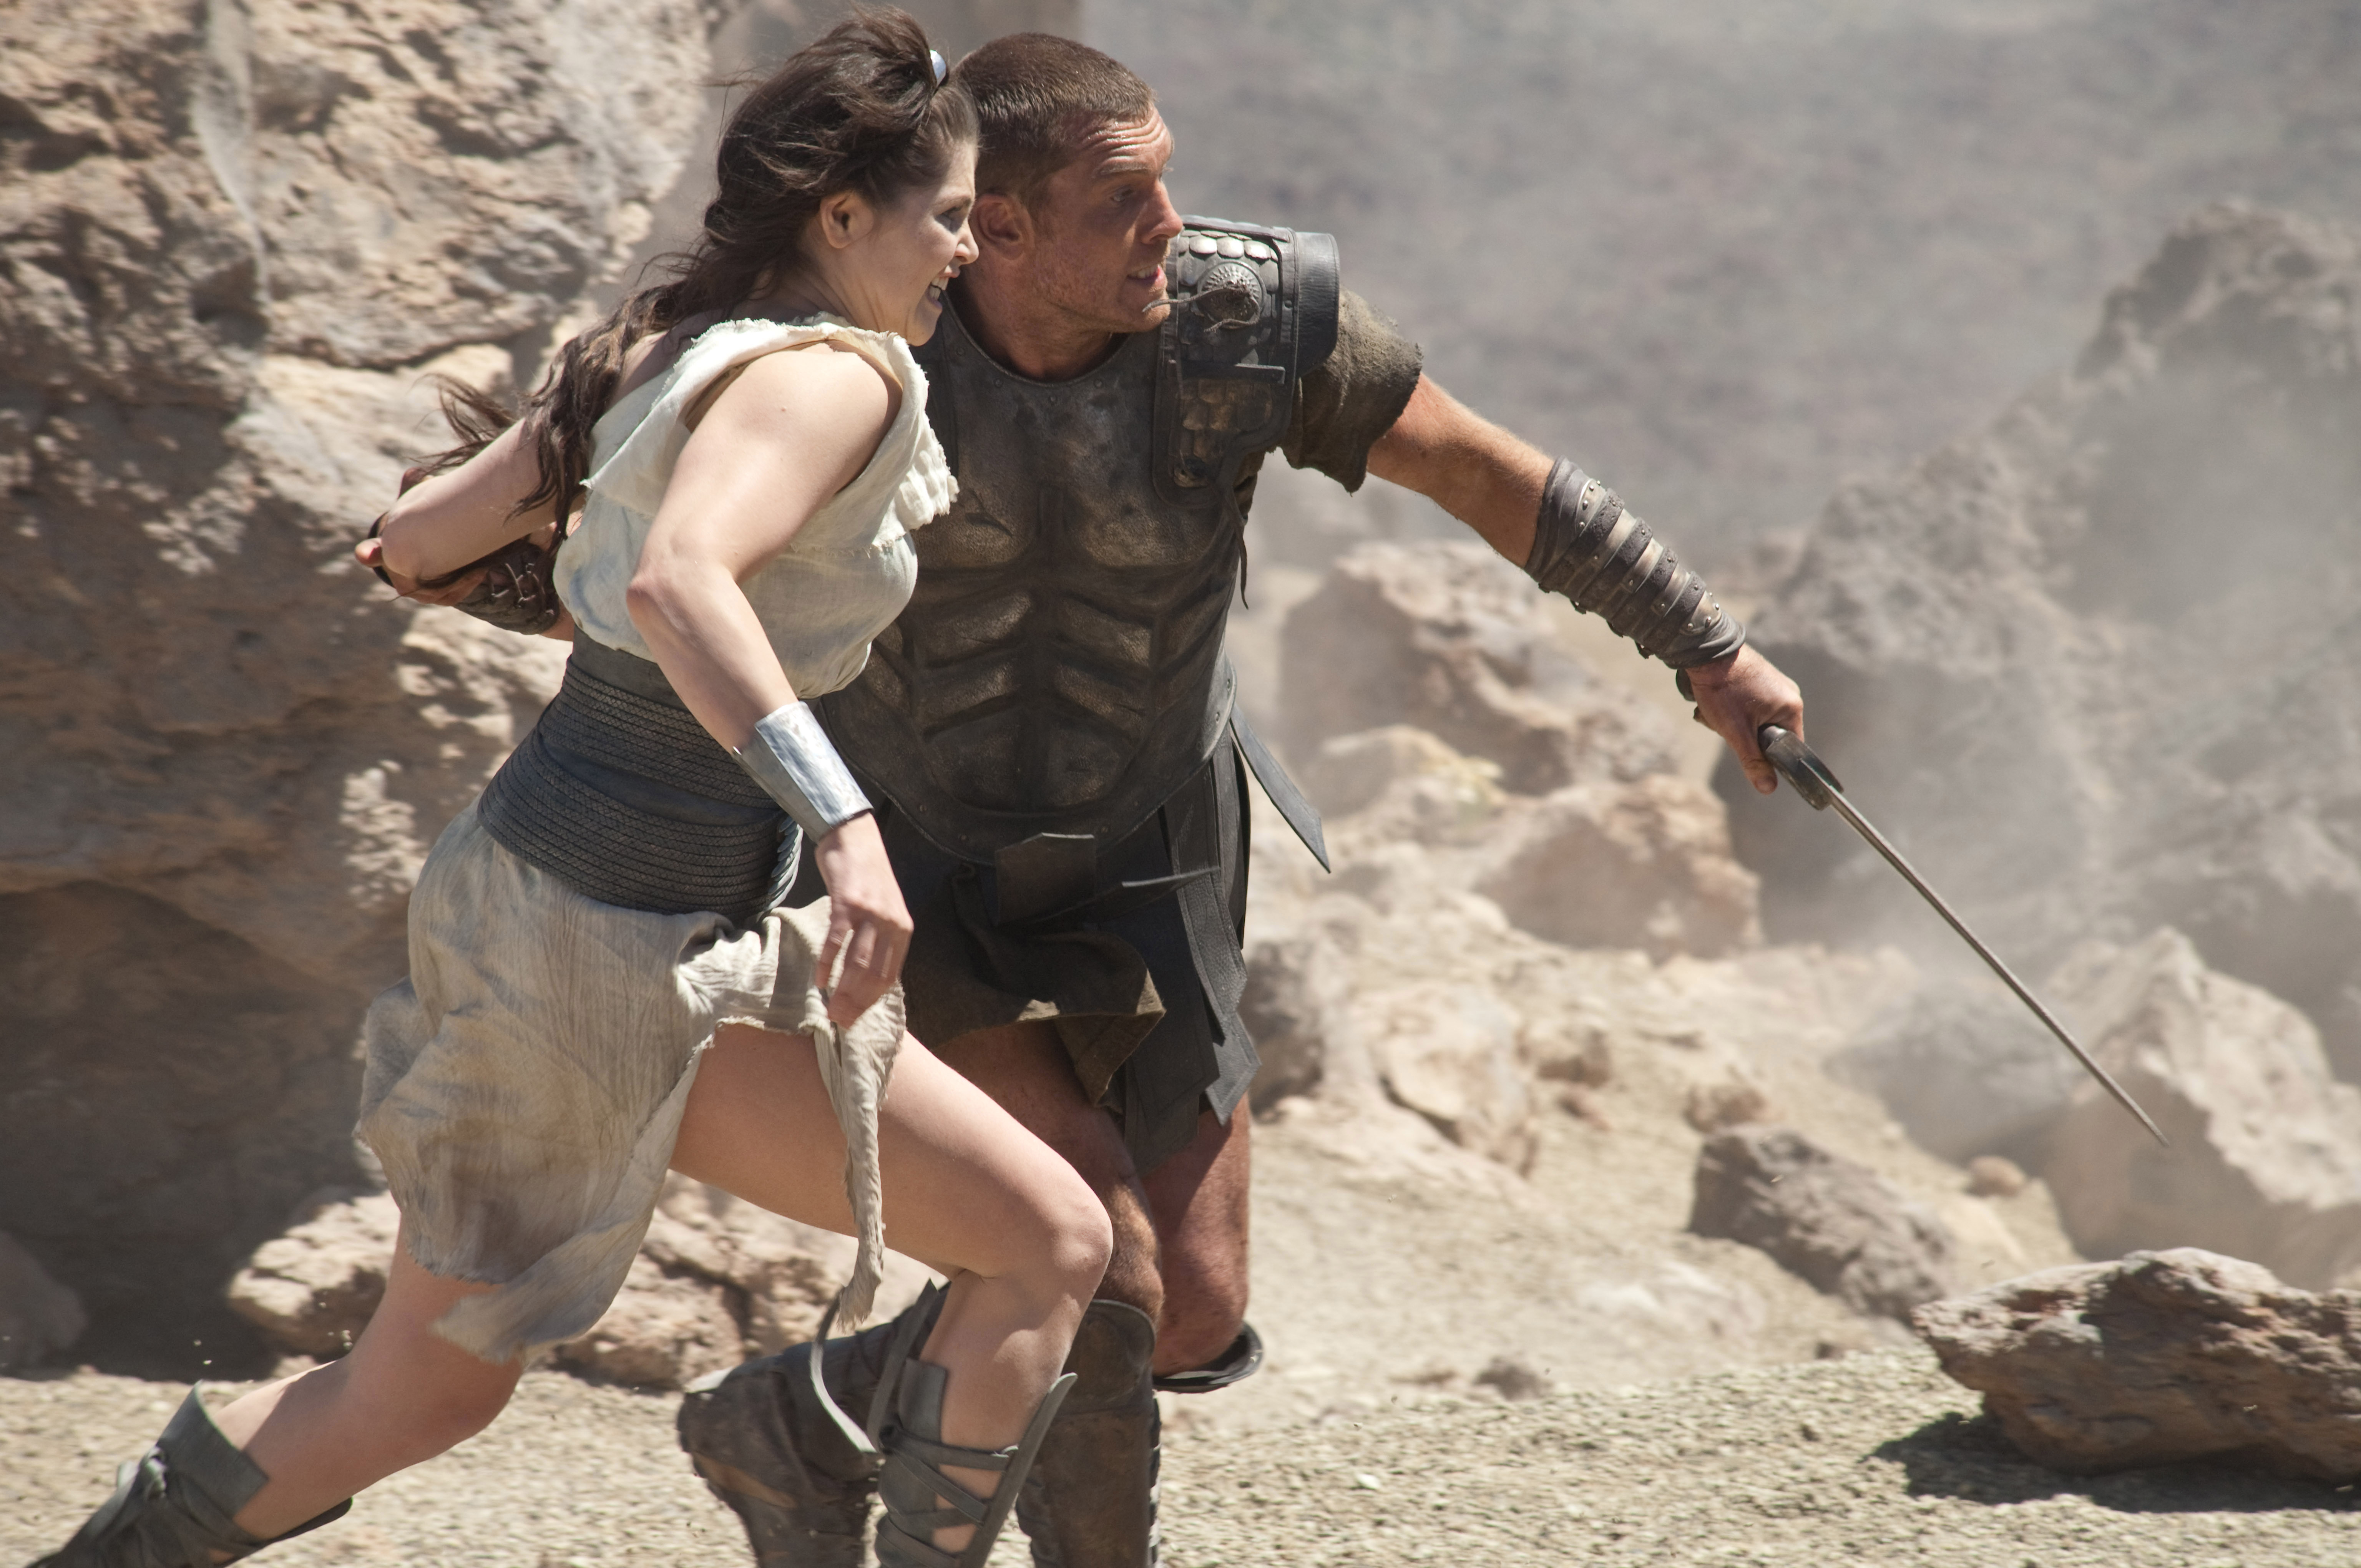 Action and politics Clash in latest film epic - Daily Trojan